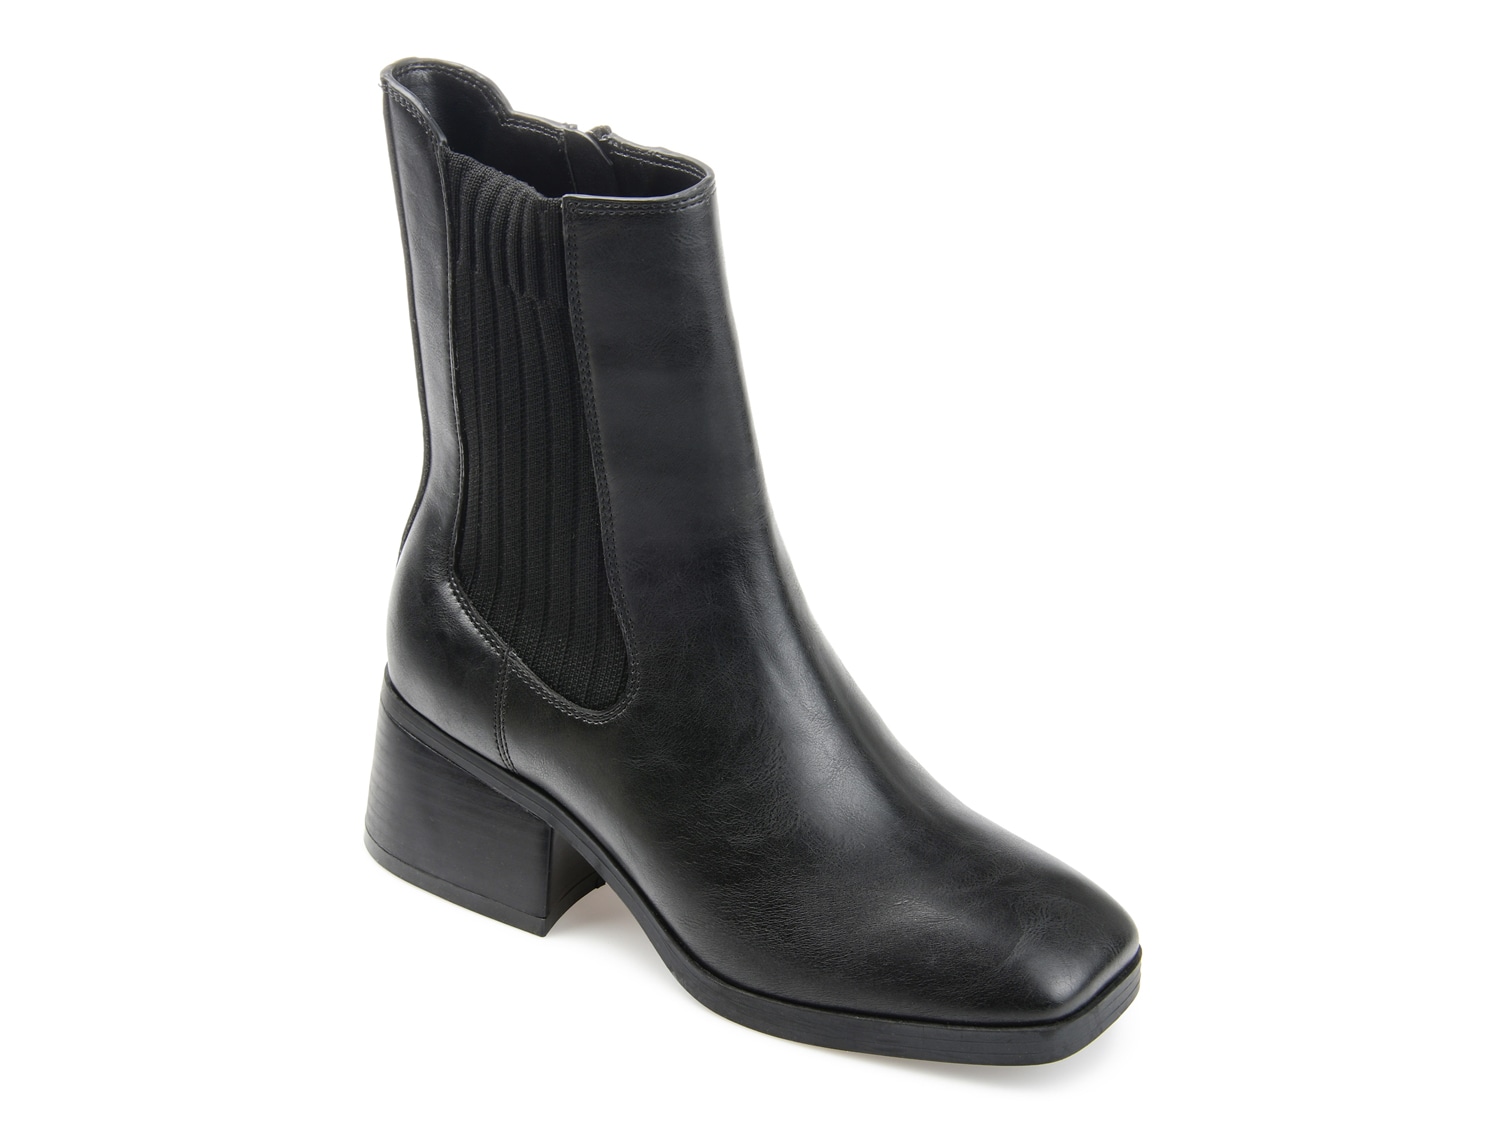 Journee Collection Desree Bootie - Free Shipping | DSW